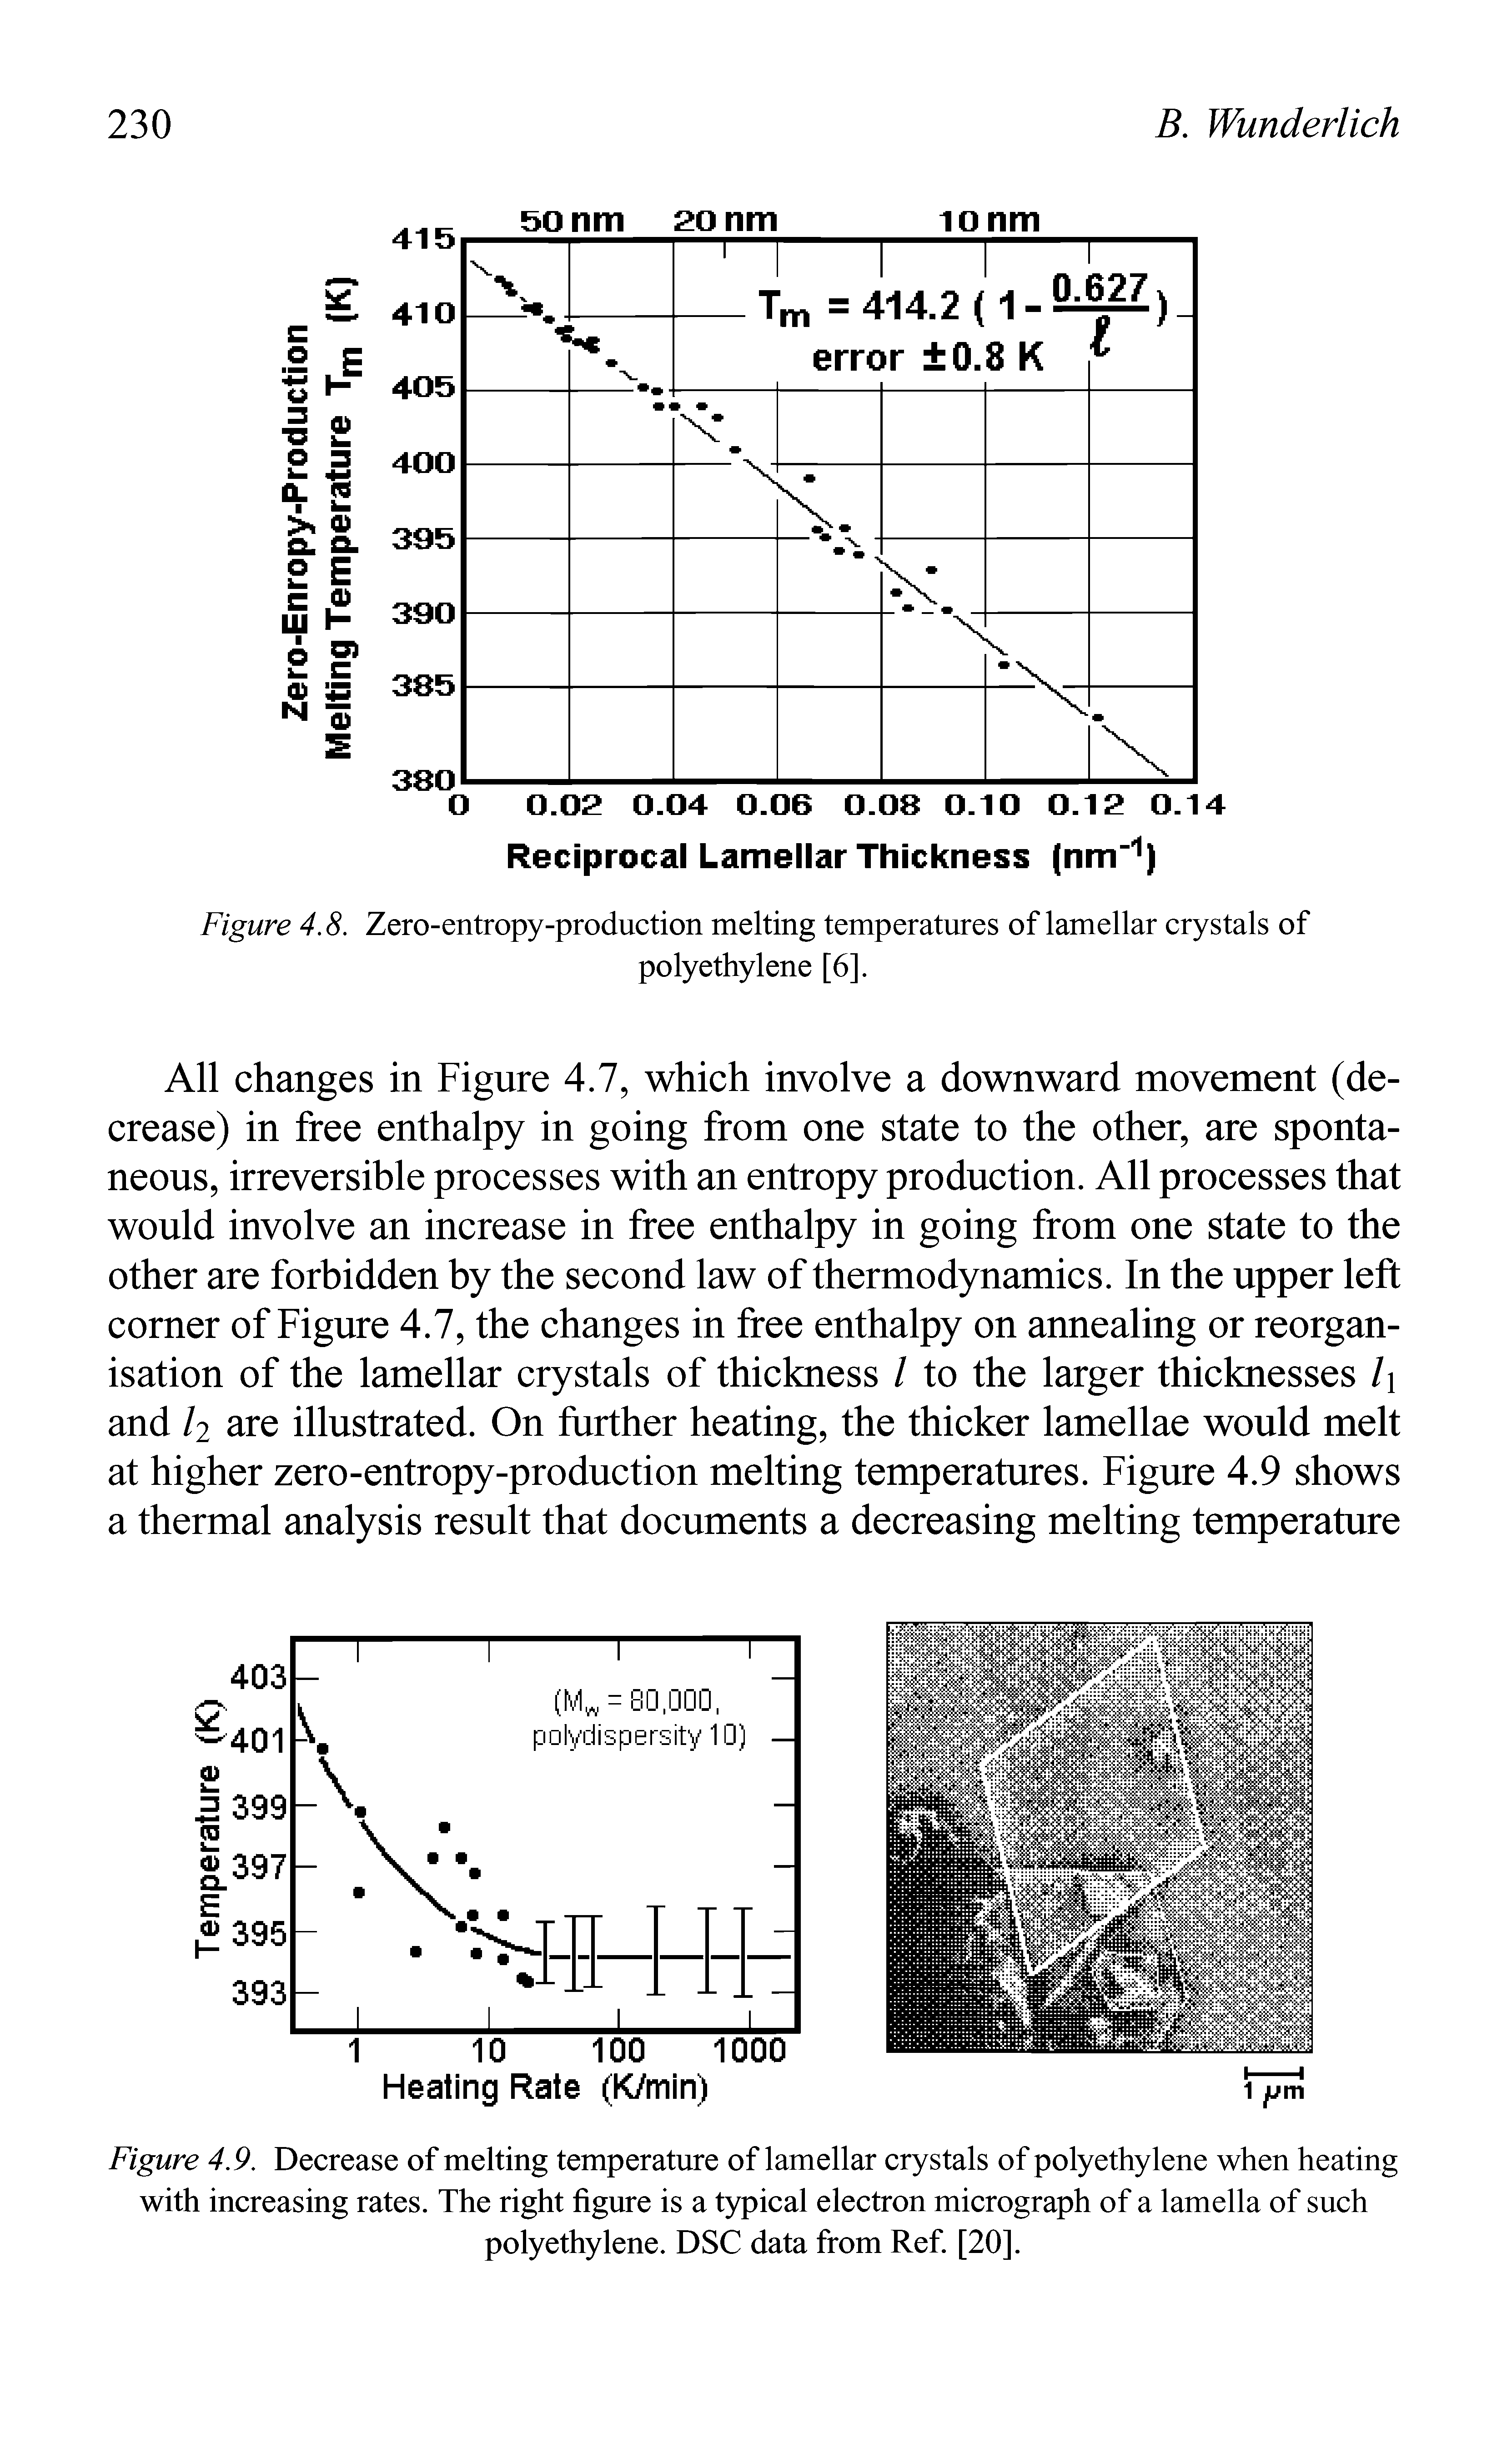 Figure 4.9. Decrease of melting temperature of lamellar crystals of polyethylene when heating with increasing rates. The right figure is a typical electron micrograph of a lamella of such polyethylene. DSC data from Ref. [20].